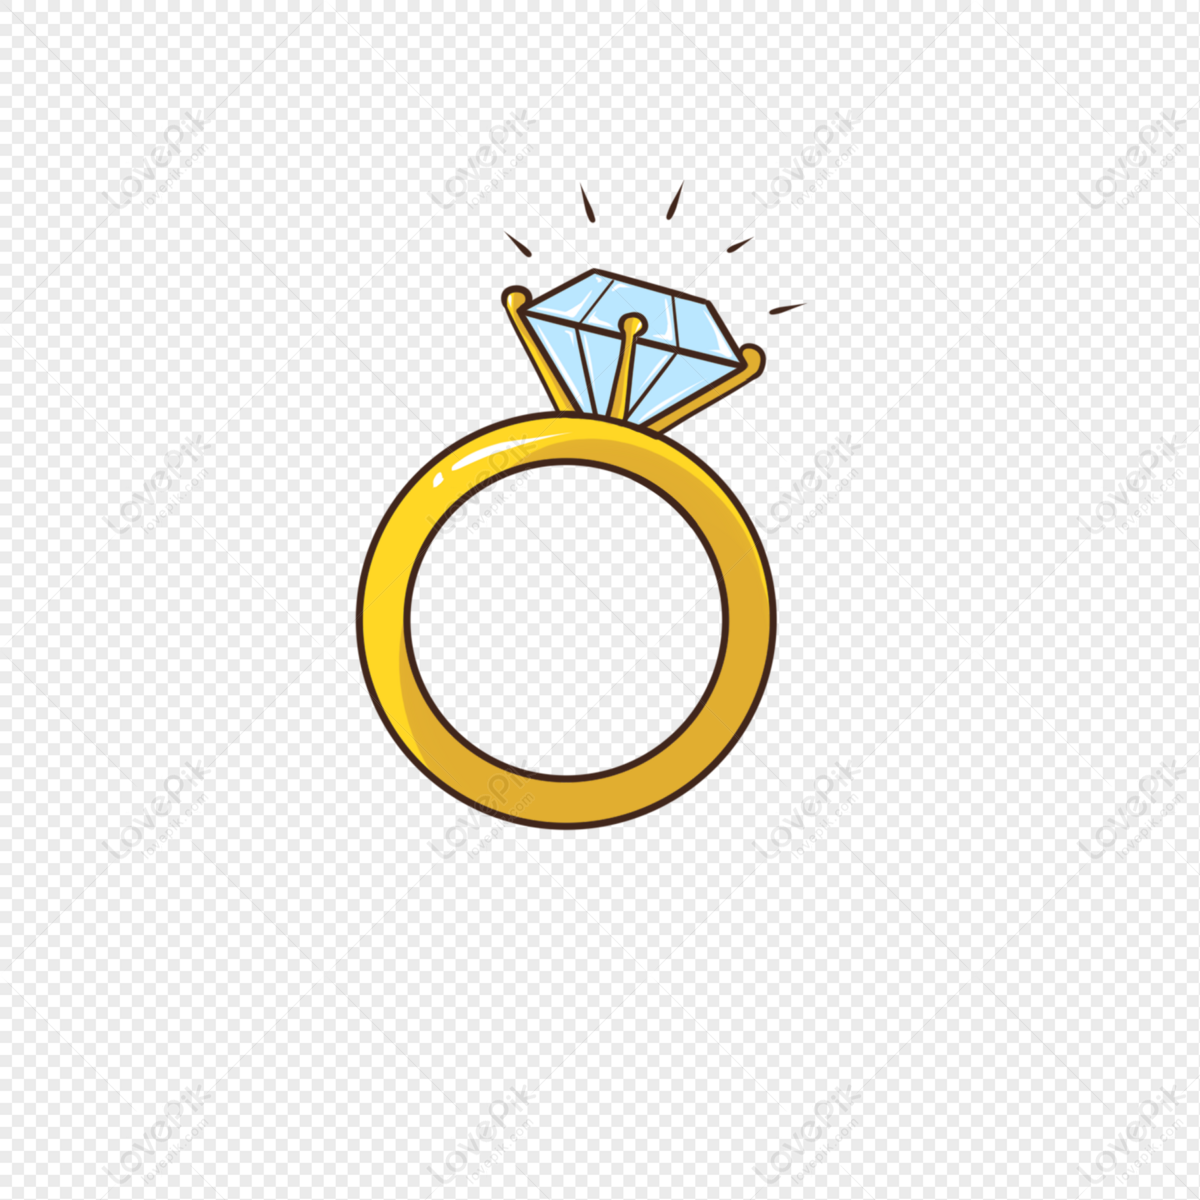 200+] Wedding Ring Clipart Png Images | Wallpapers.com